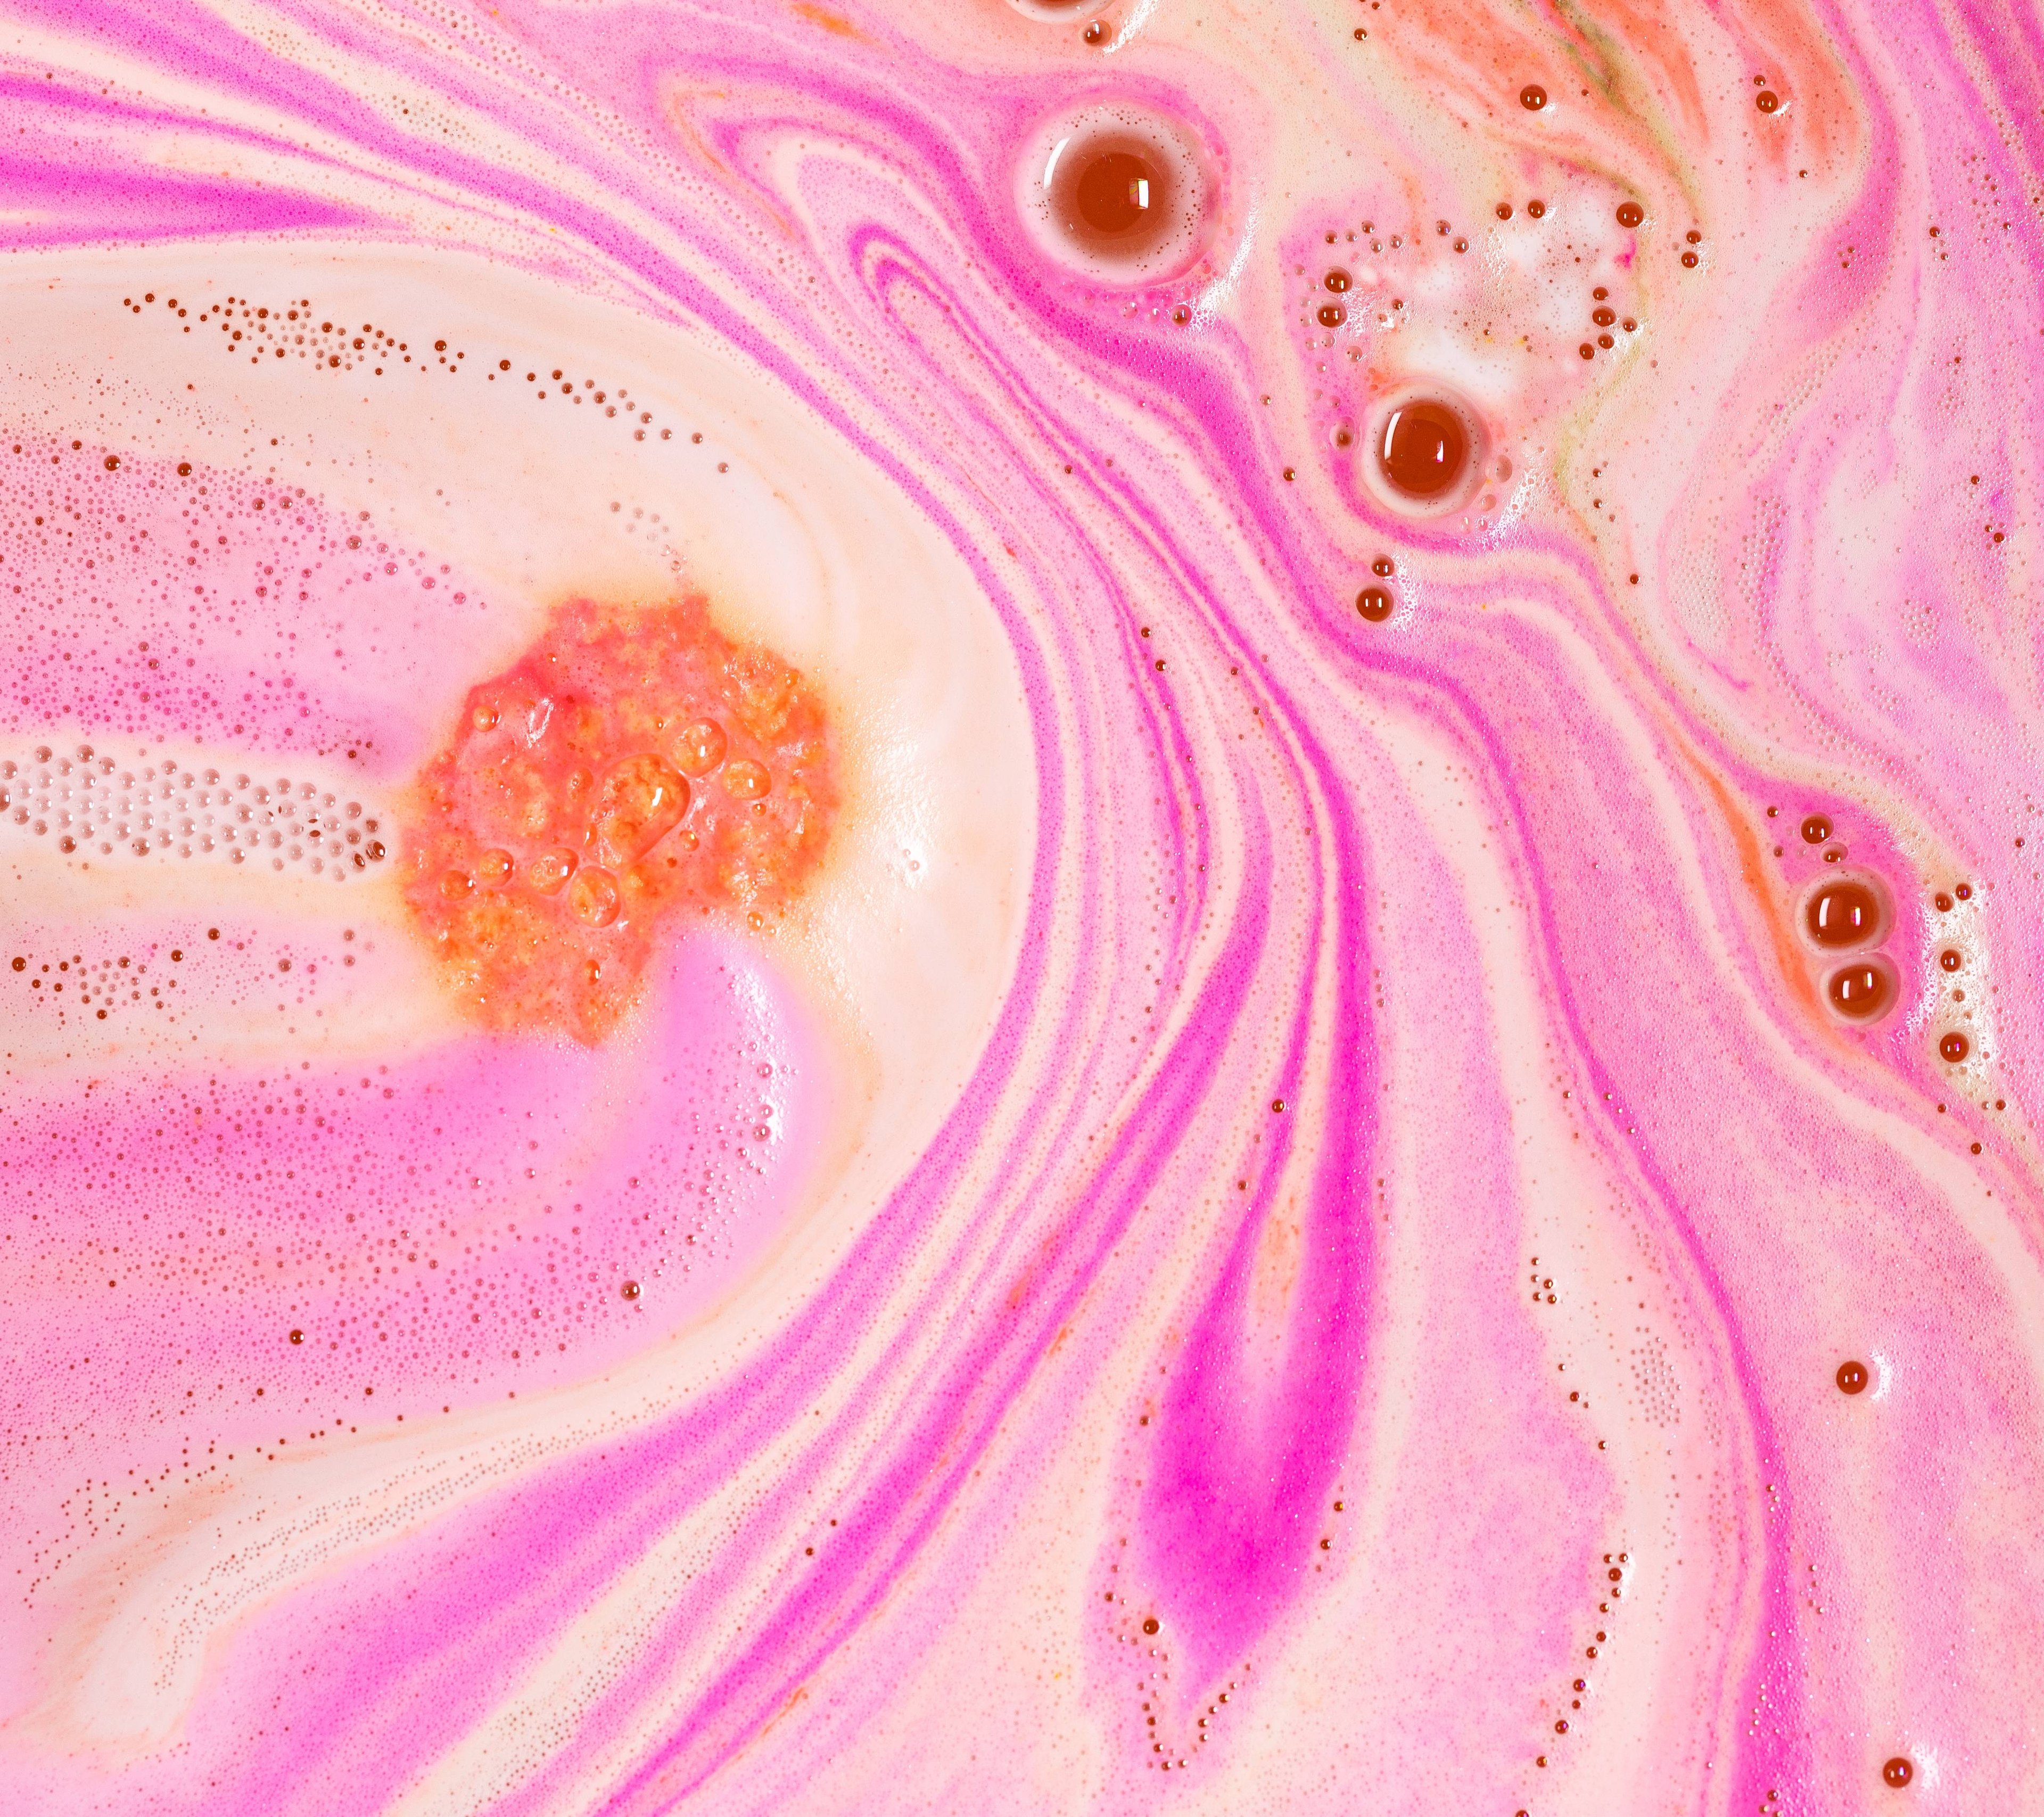 A close-up of a submerged Peachy bath bomb with a peachy pink, orangey foam and large bubbles. 